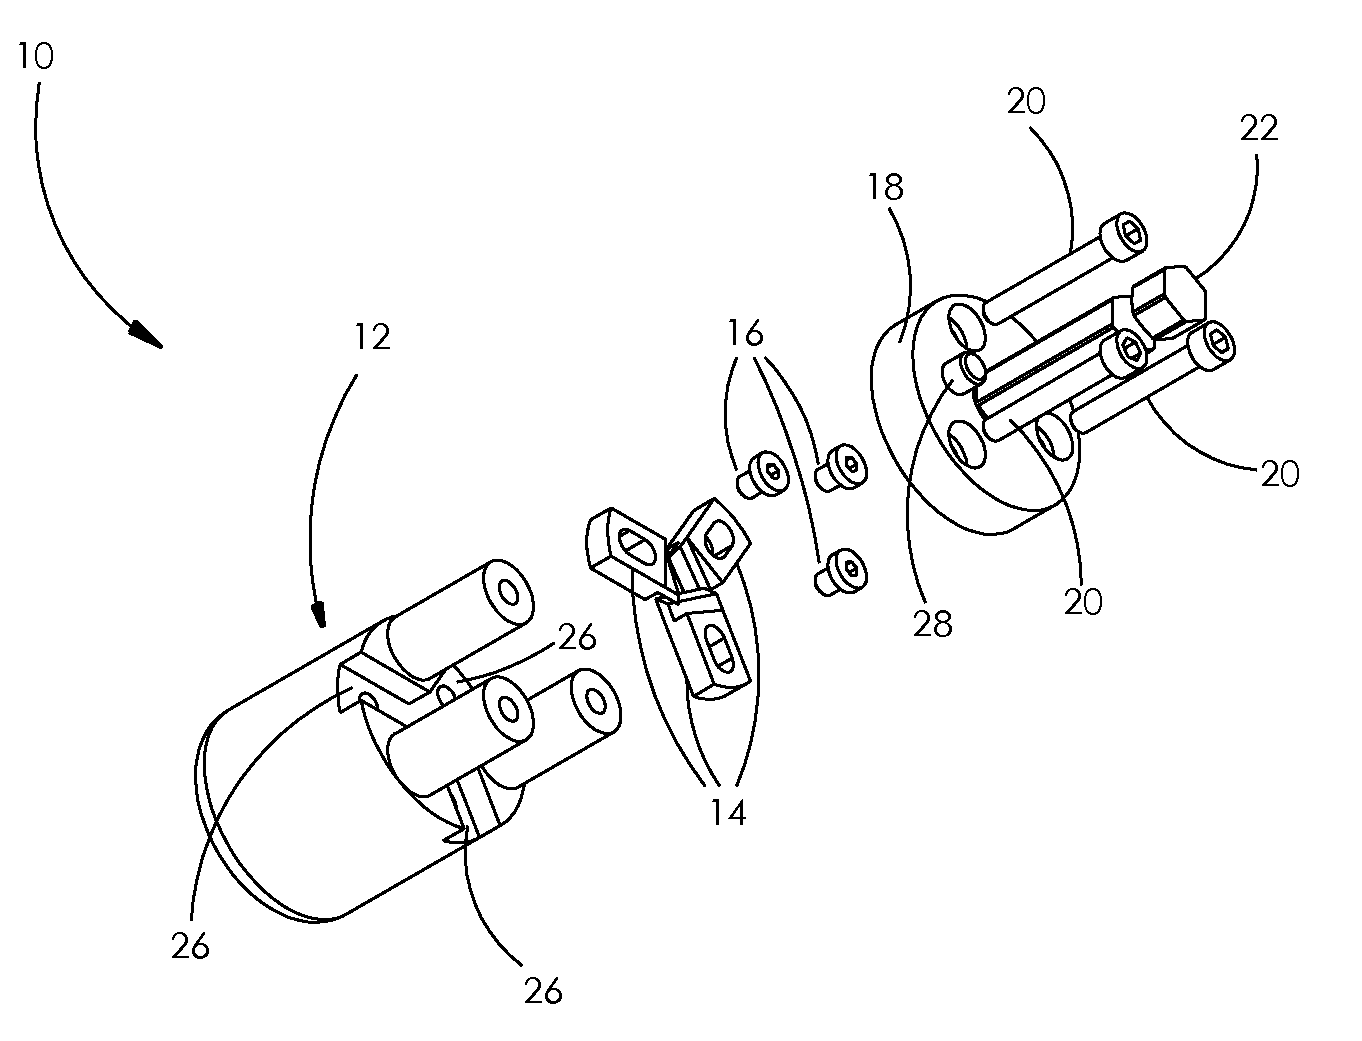 Electrical wire tool